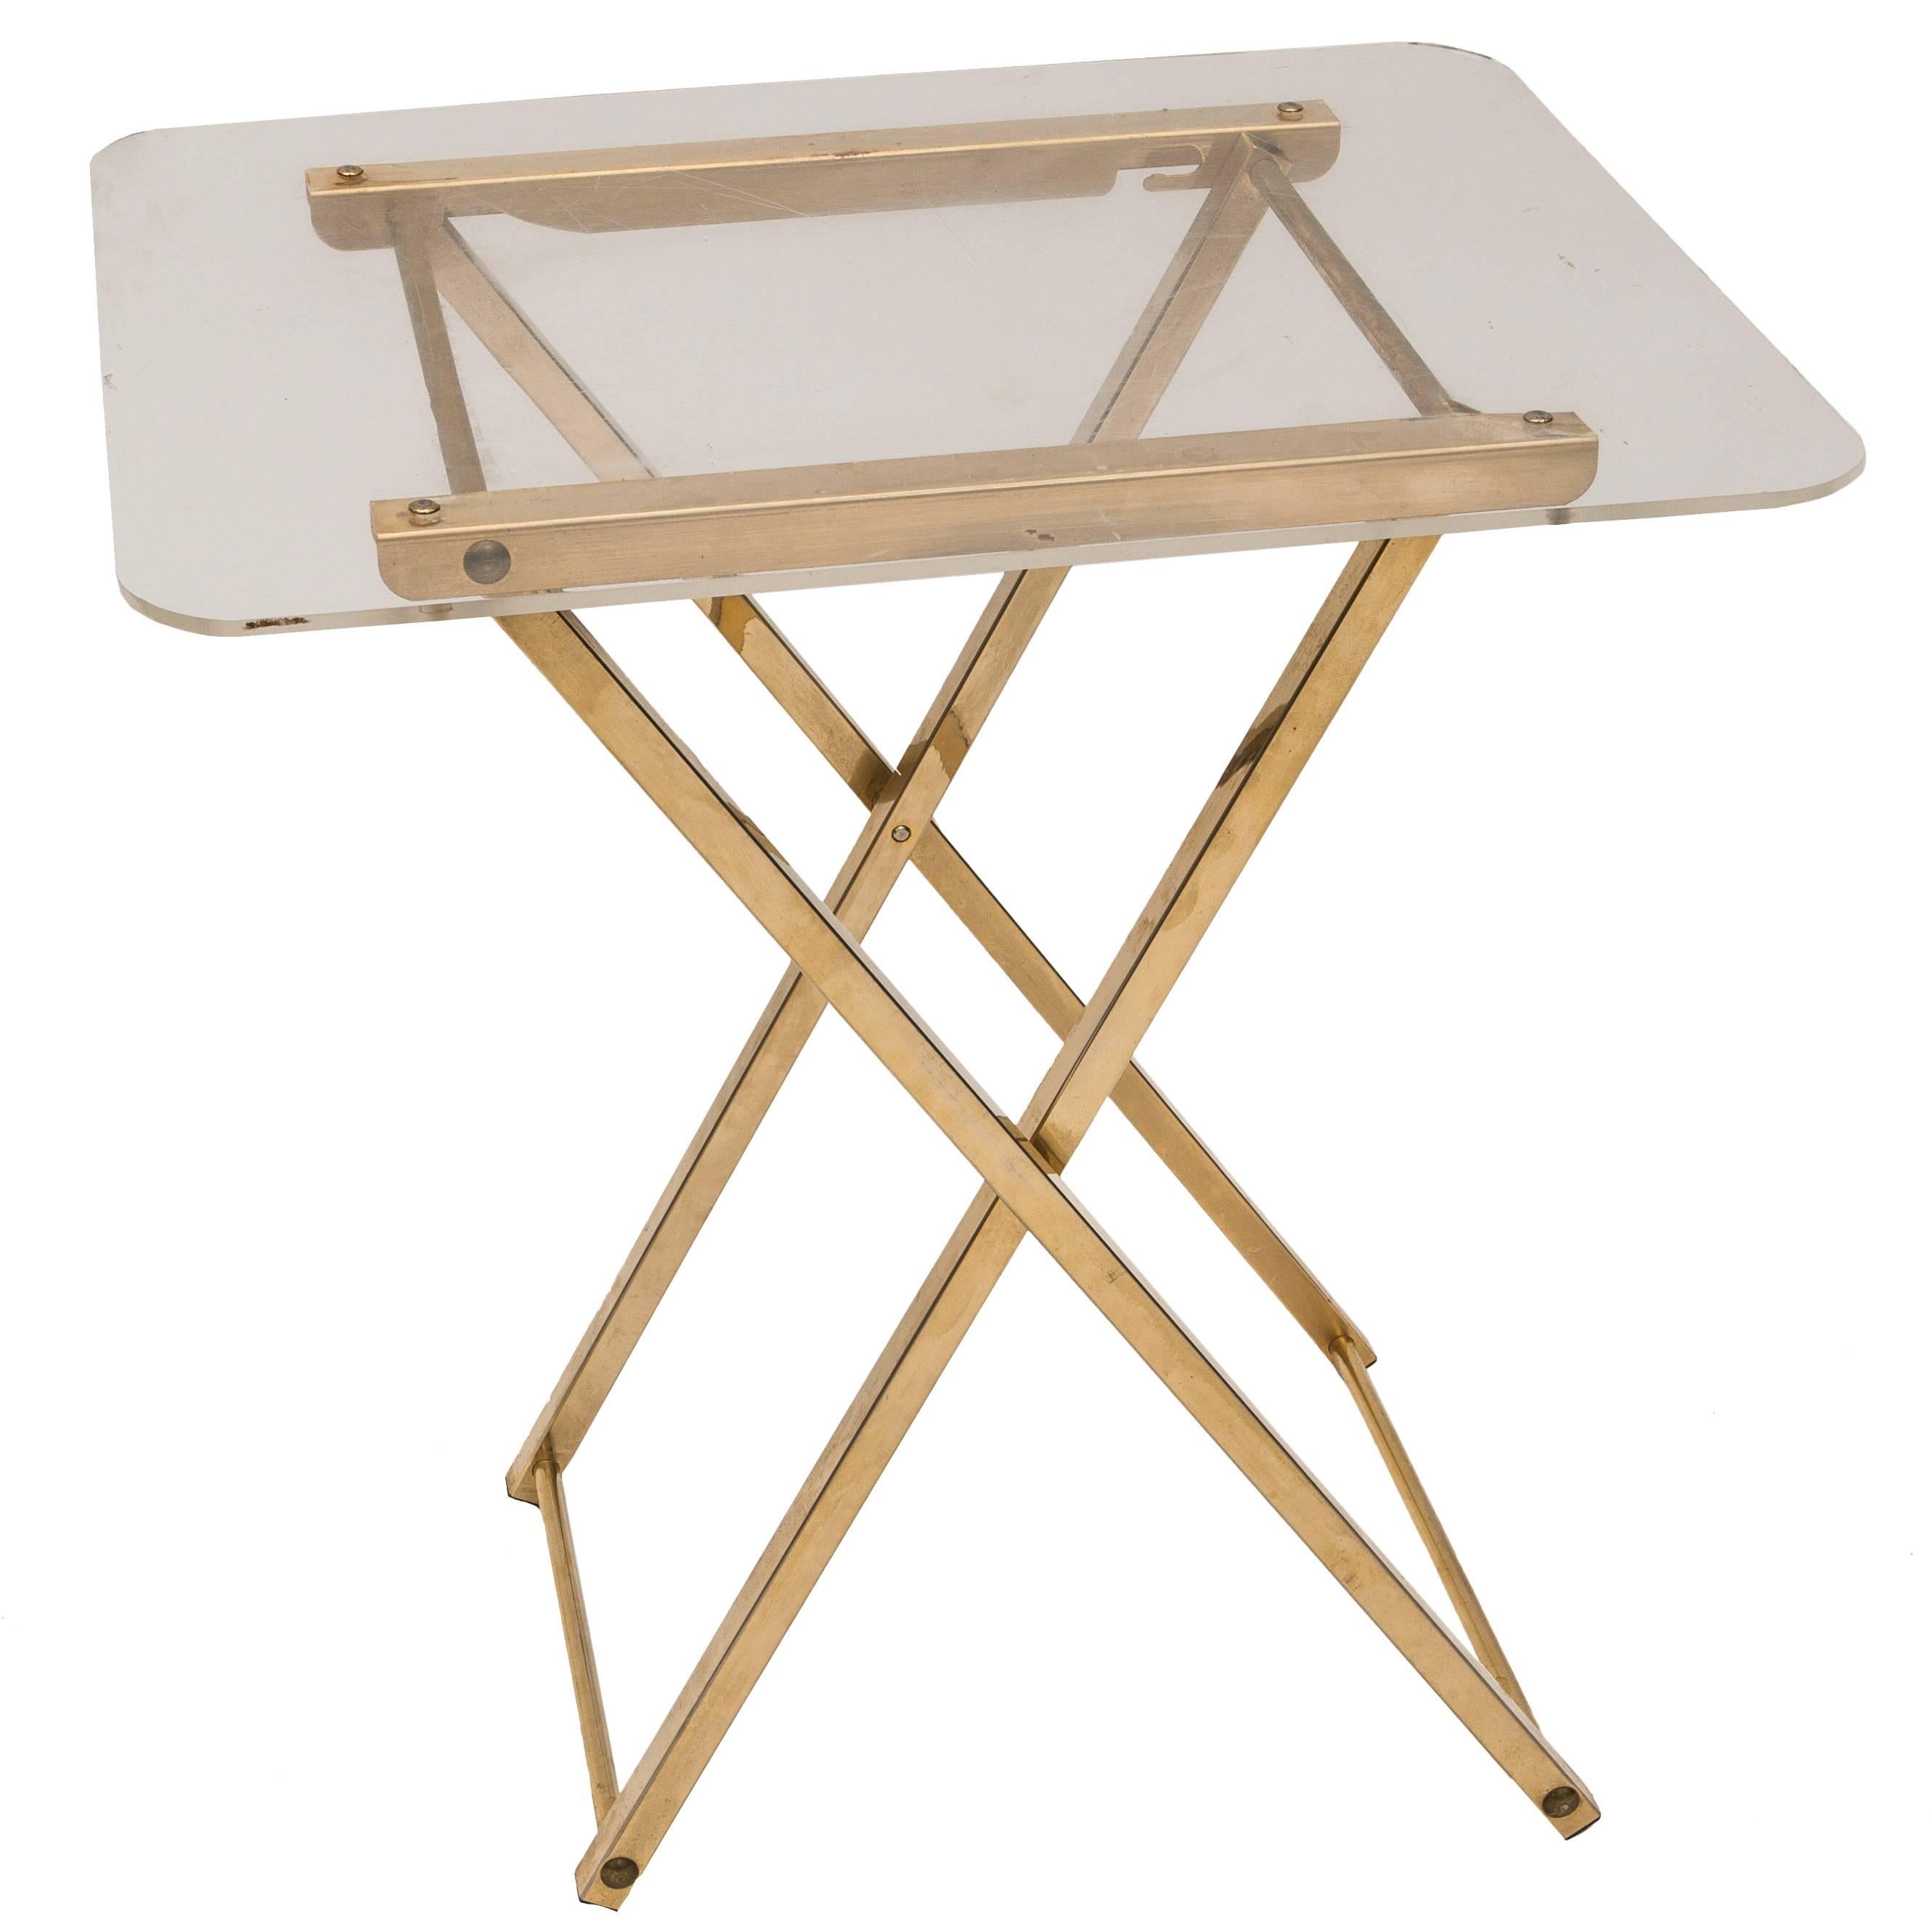 Italian Mid Century Modern Lucite and Brass Folding Table For Sale